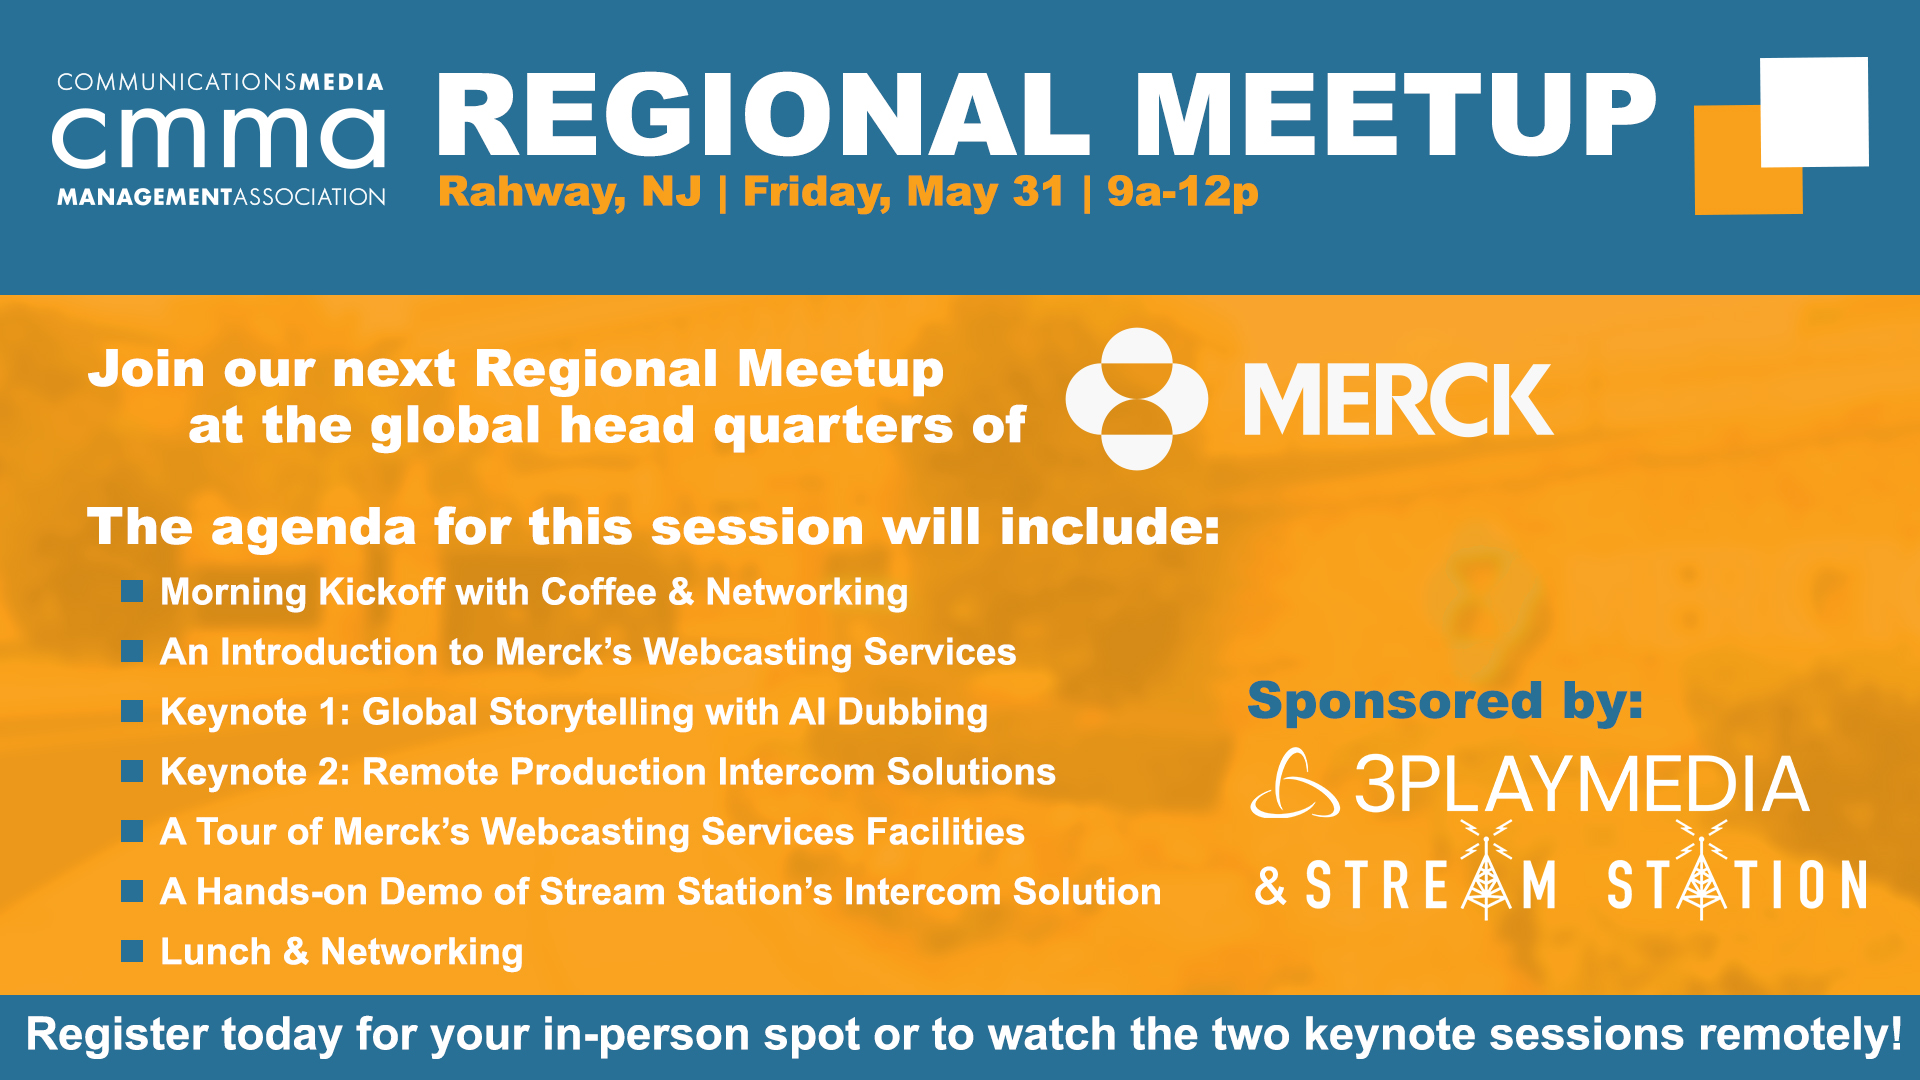 Promotional graphic for a regional meetup at merck's global headquarters on may 31, featuring keynotes, a tour, and networking, hosted by cmma with service sponsors 3playmedia and stream.